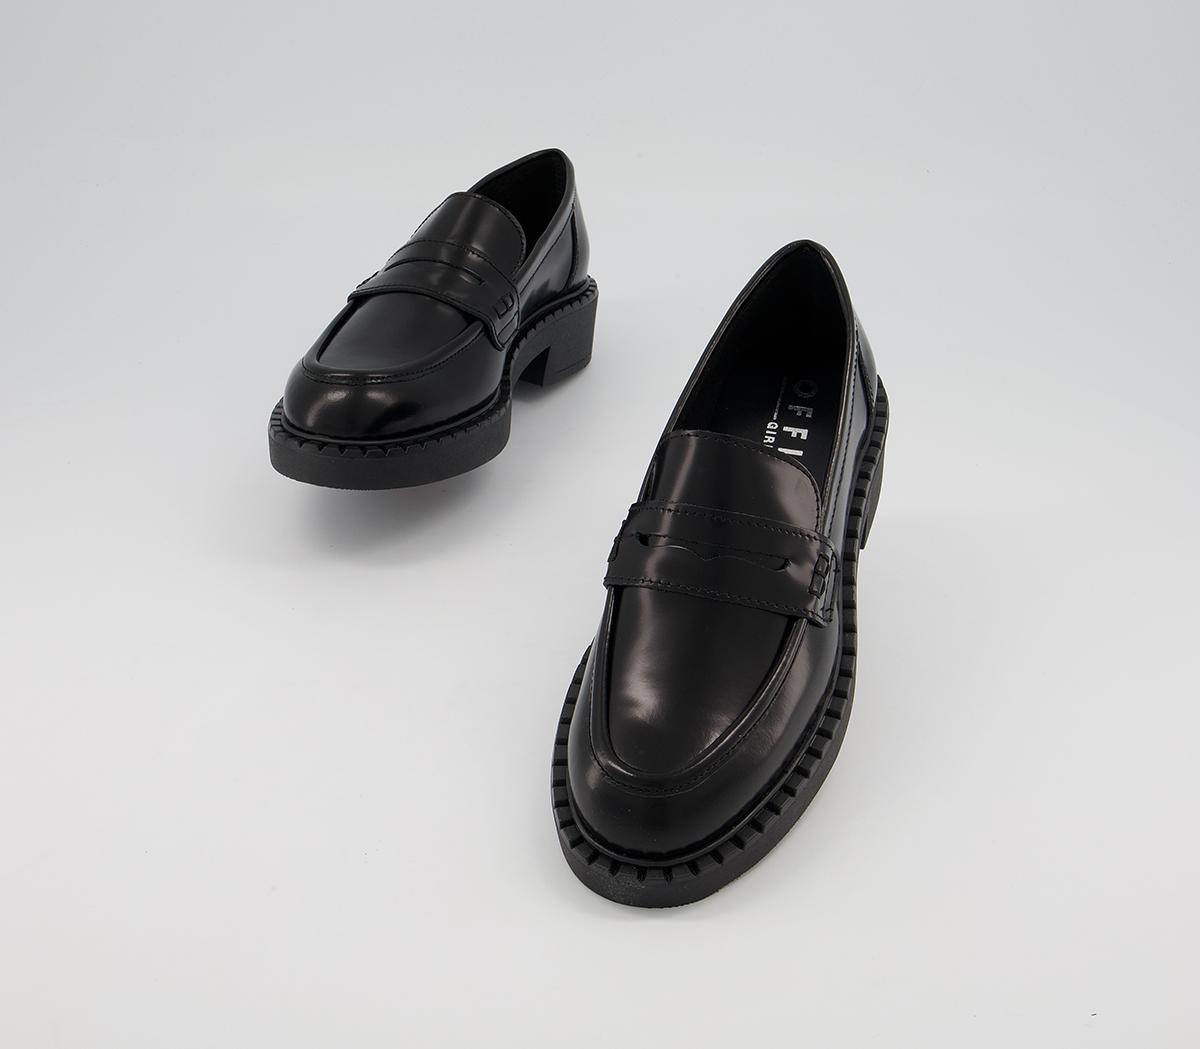 OFFICE Favour Chunky Sole Loafers Black Box Leather - Flat Shoes for Women